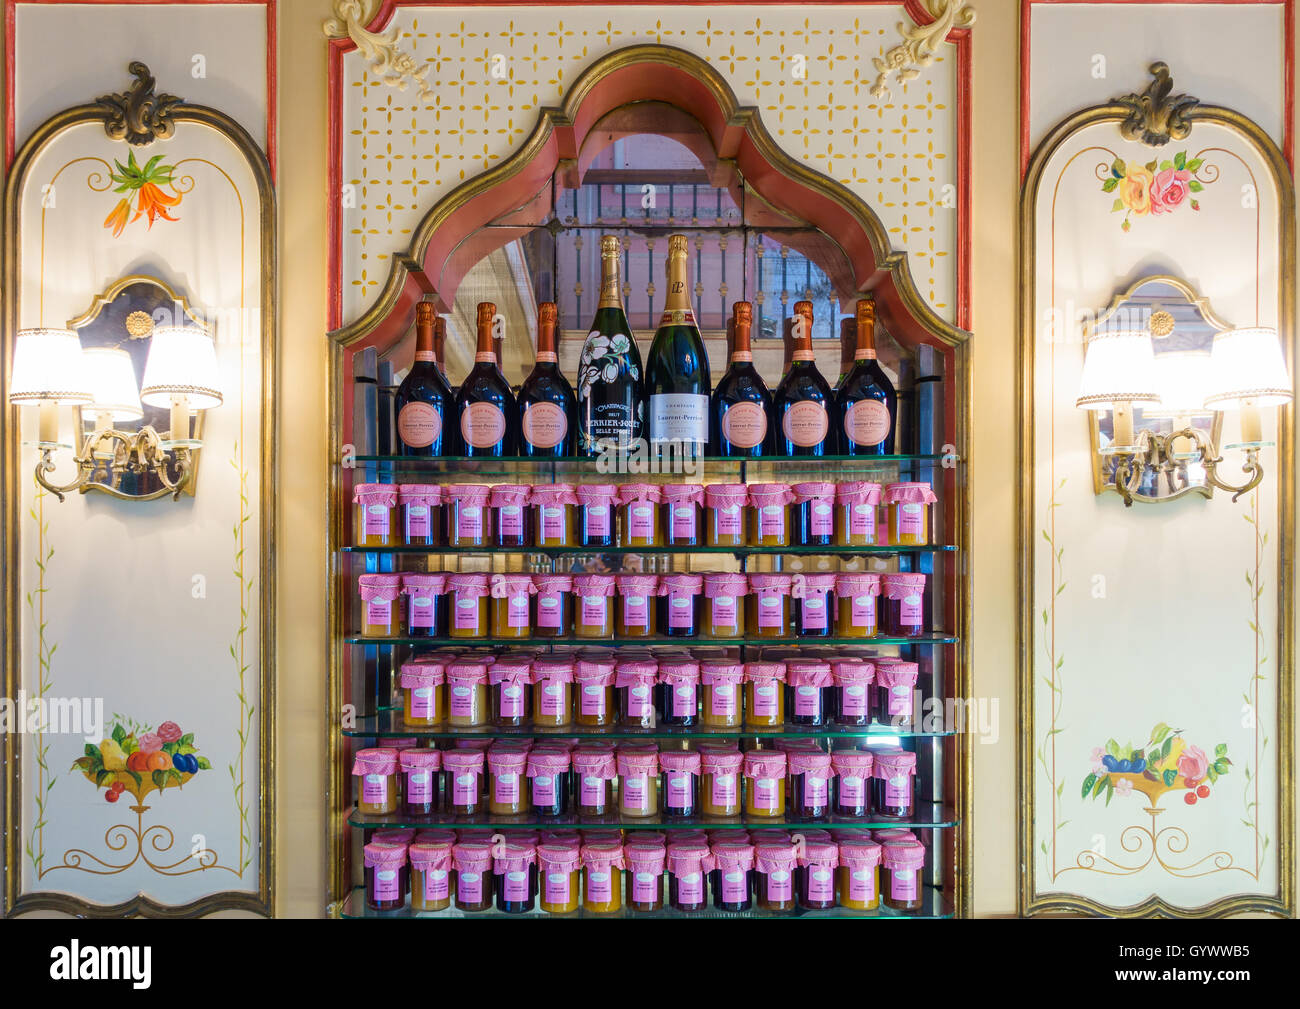 Jam pots and Champagne bottles on display at Miremont tearoom in Biarritz, France Stock Photo